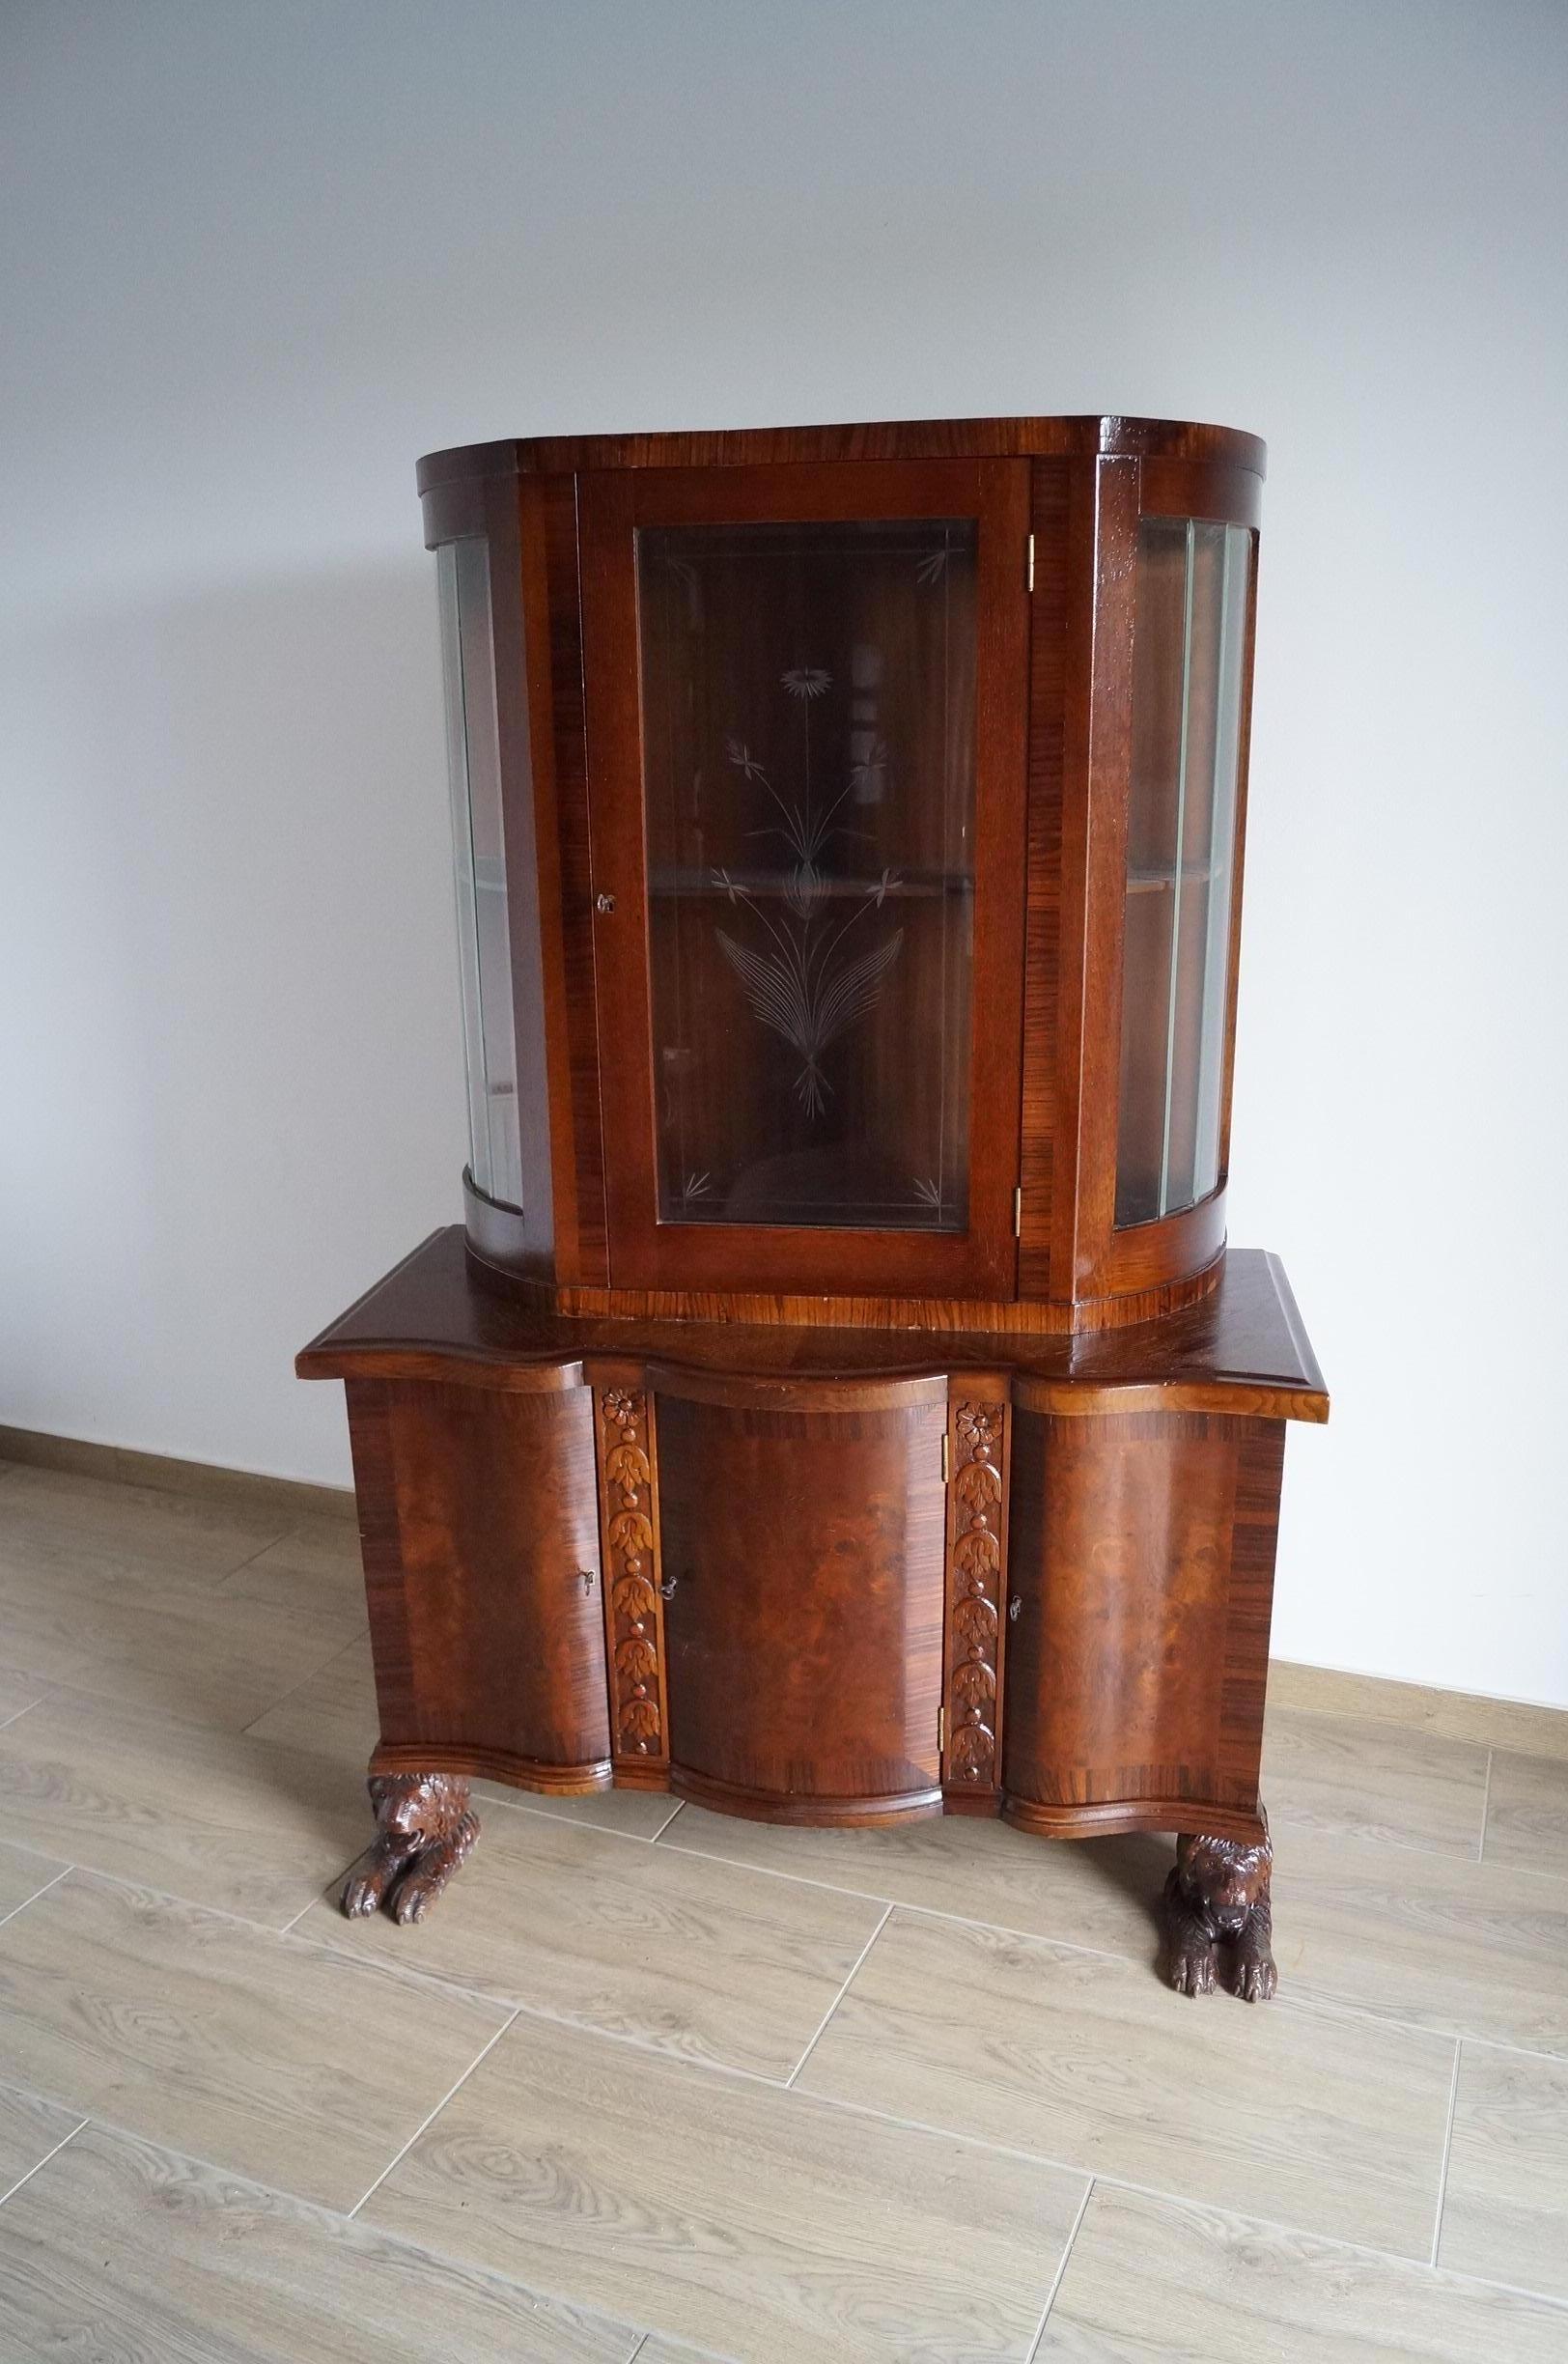 China closet from 1900.

Every piece of furniture that leaves our workshop from the beginning to the end is subjected to manual renovation, so as to restore its original condition from many years ago
(It has been cleaned to bare veneer,